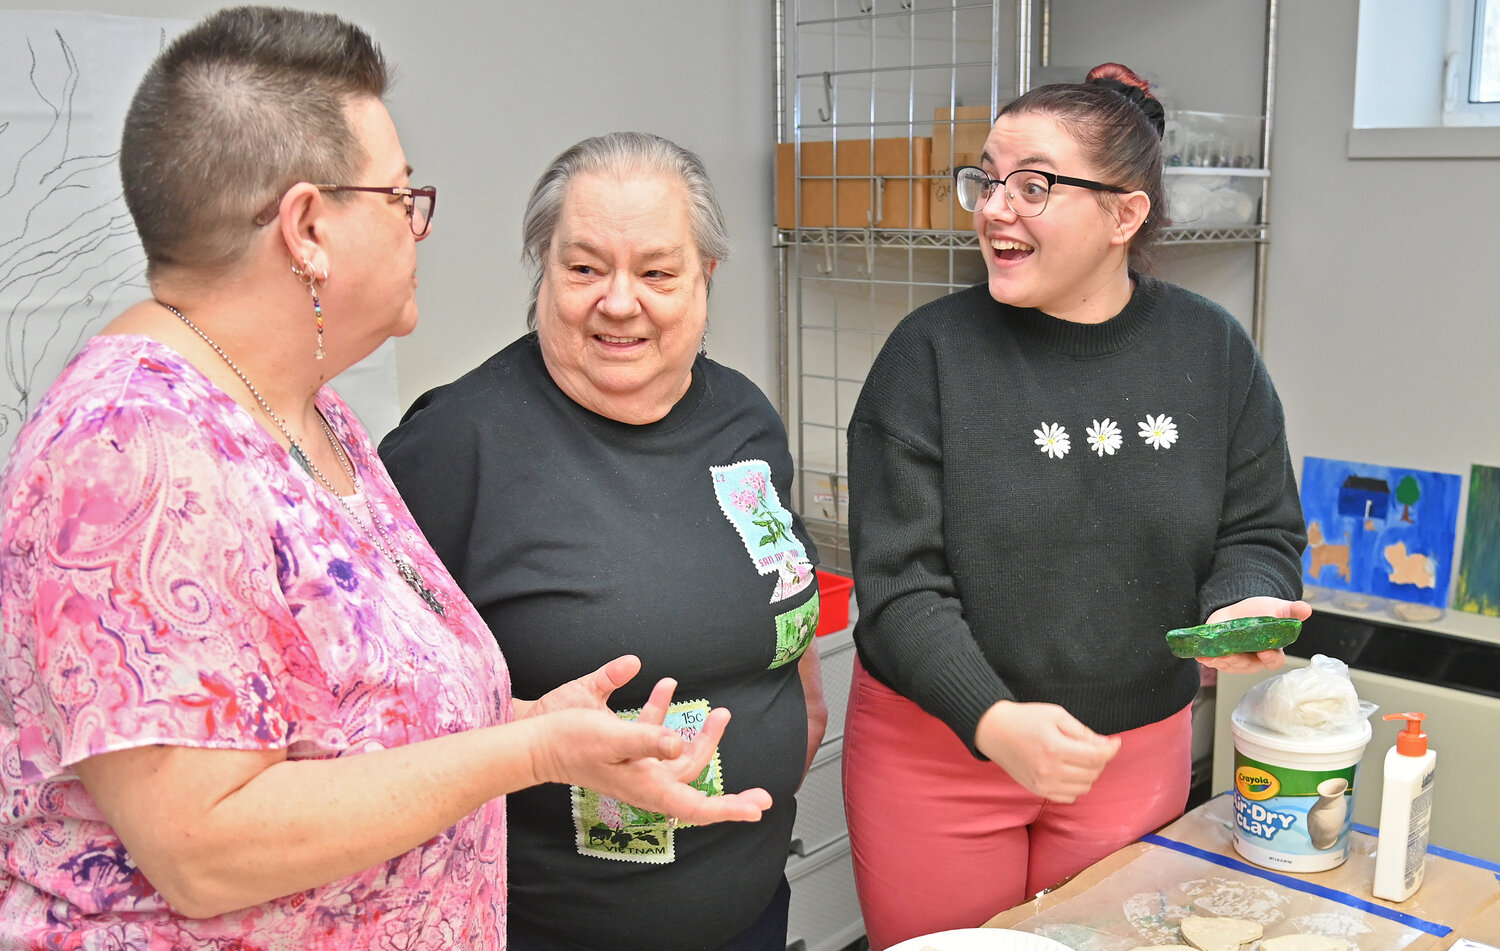 From left, Ida Weiss, daughter of participant Mary Youker with Celena Moulton, art therapy intern at the Resource Center for Independent Living’s Open House on Wednesday, March 22. They were looking over a community art project that participant Youker was working on.